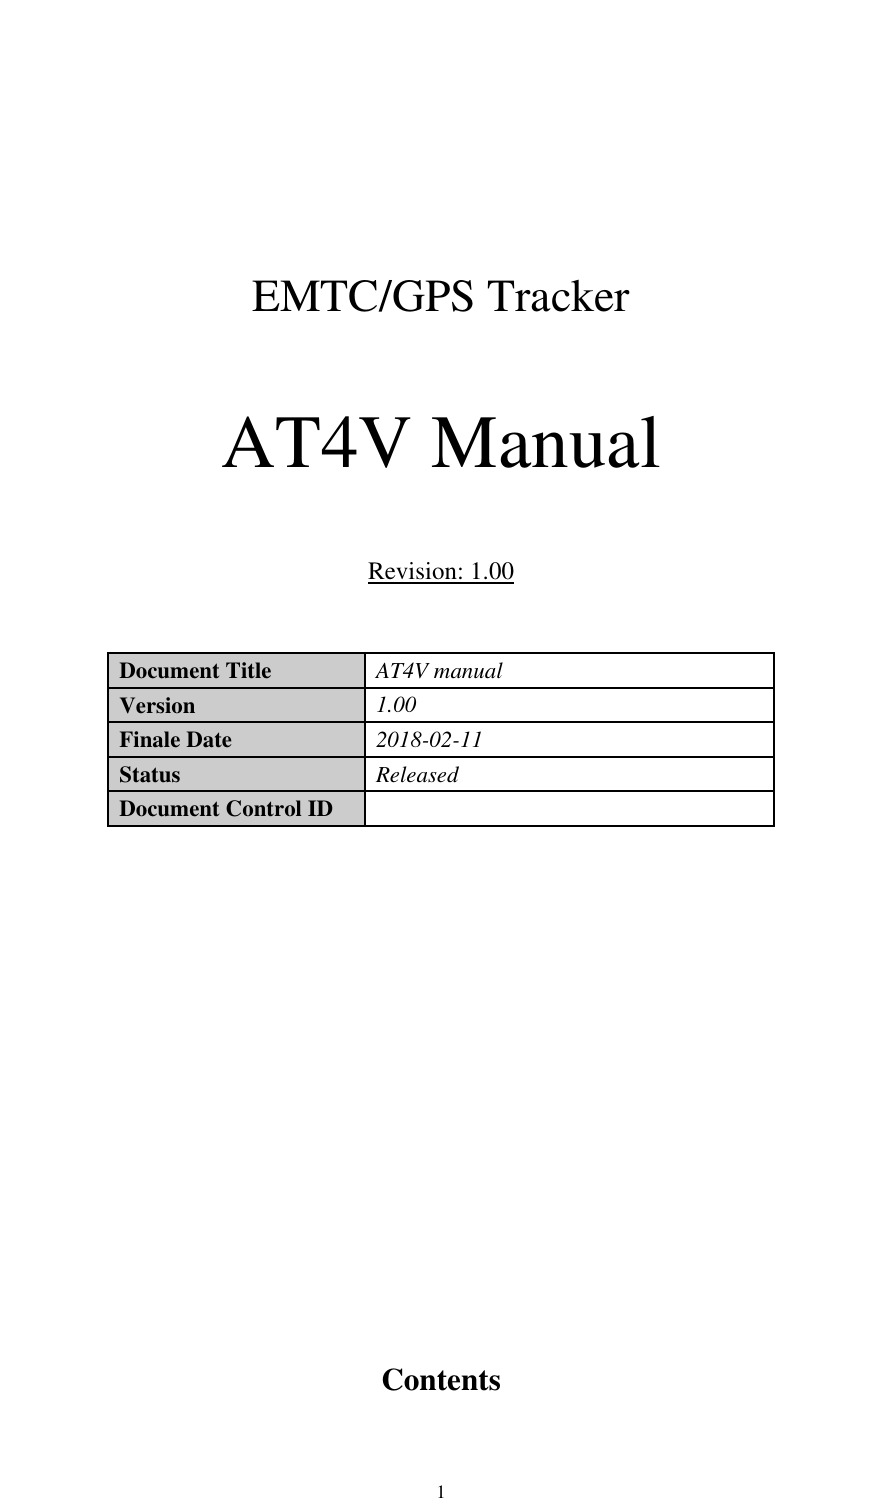  1    EMTC/GPS Tracker    AT4V Manual  Revision: 1.00  Document Title   AT4V manual   Version   1.00  Finale Date   2018-02-11 Status   Released Document Control ID                    Contents  